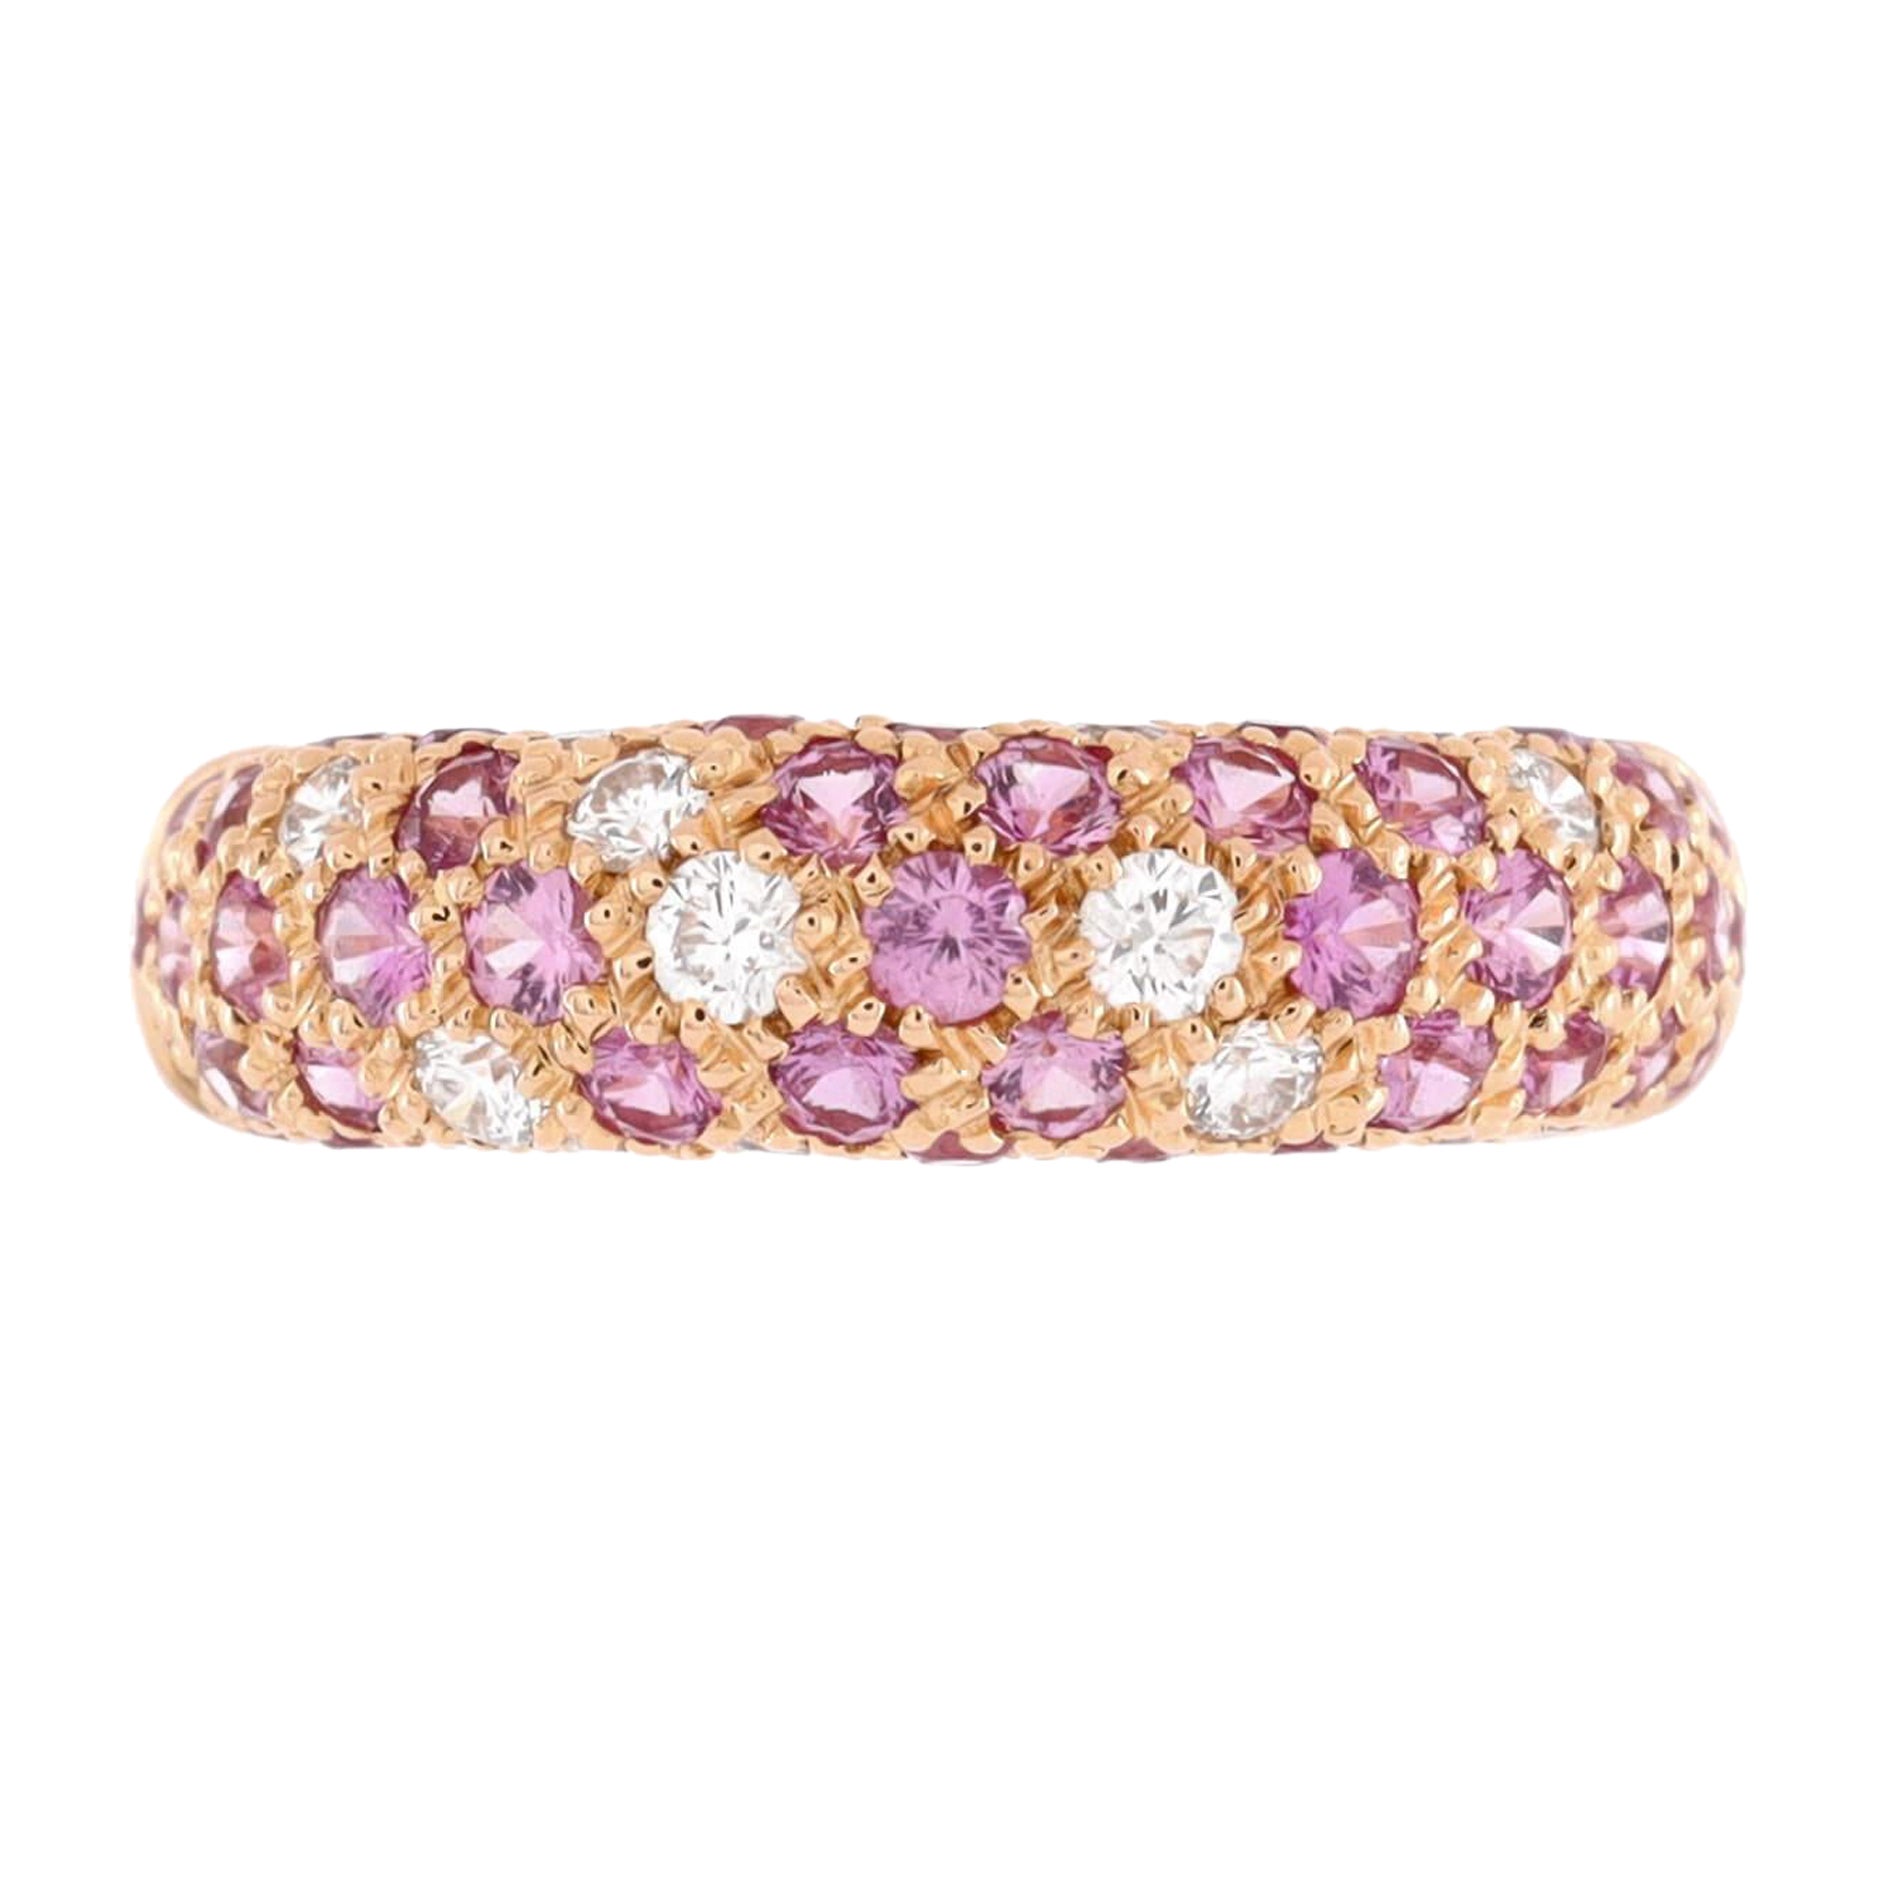 Cartier Etincelle De Cartier Ring 18k Rose Gold with Pink Sapphires and Diamonds